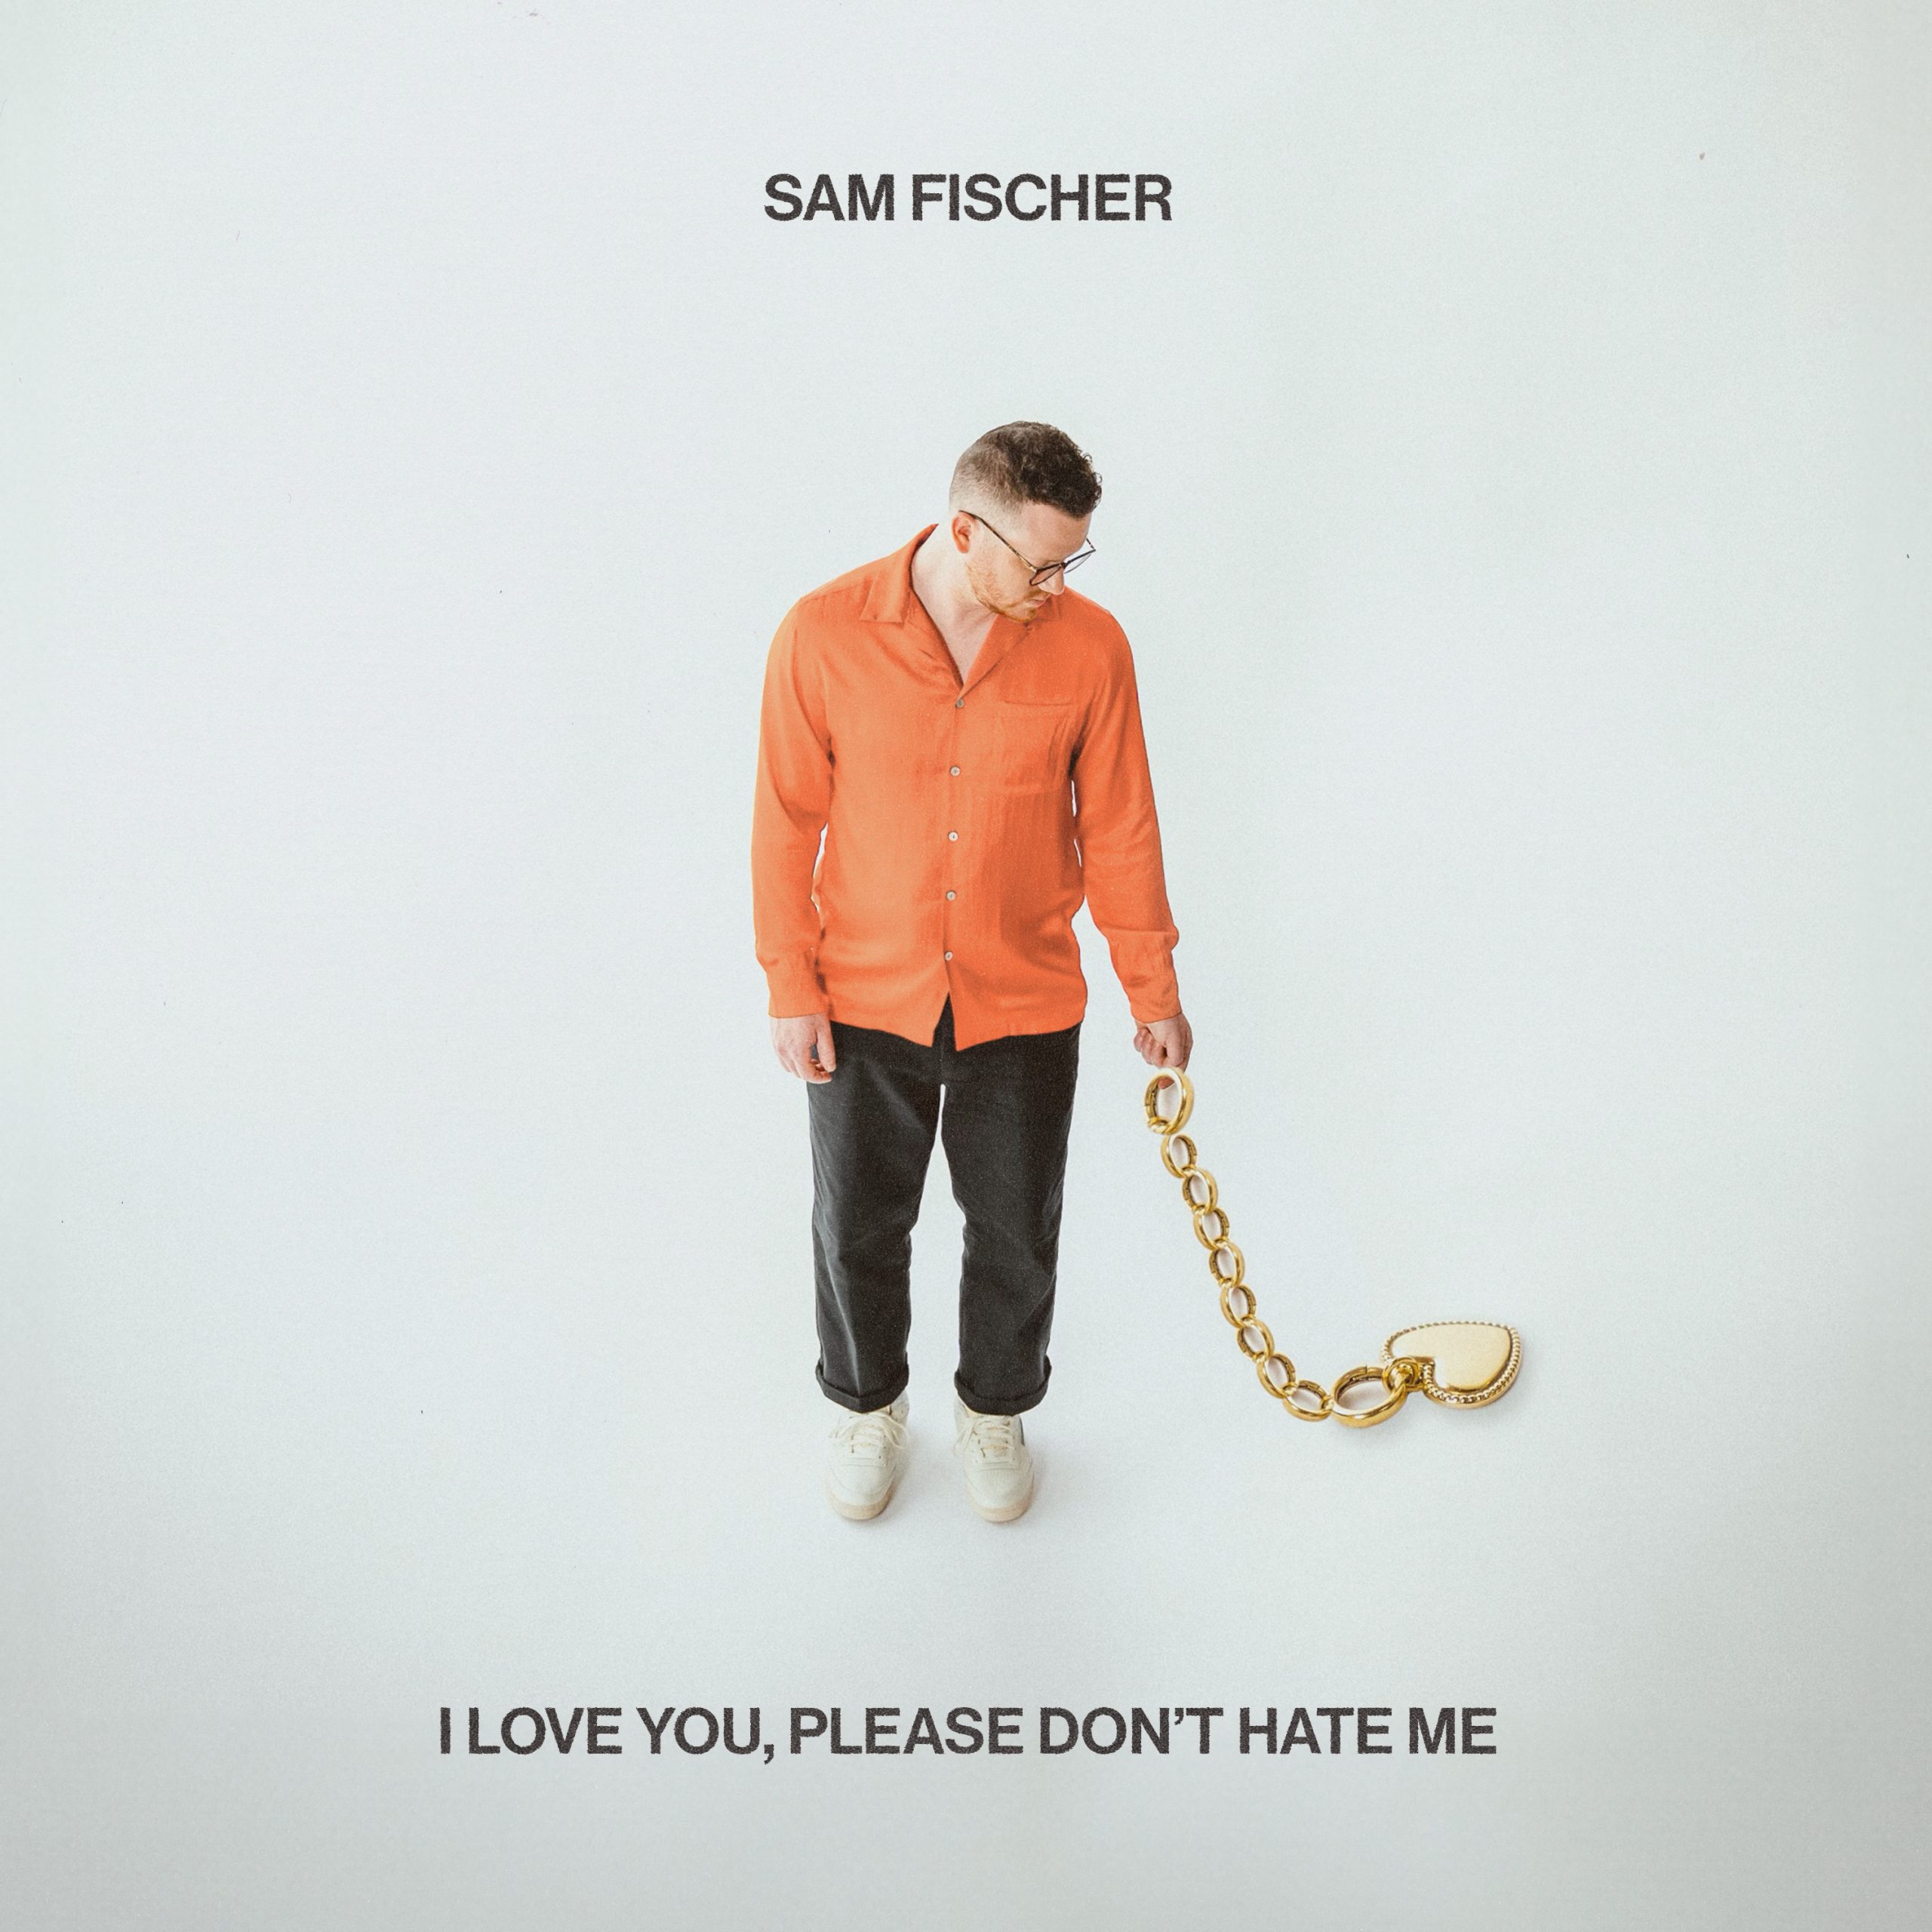 Sam-Fischer-_-I-love-you-please-dont-hate-me